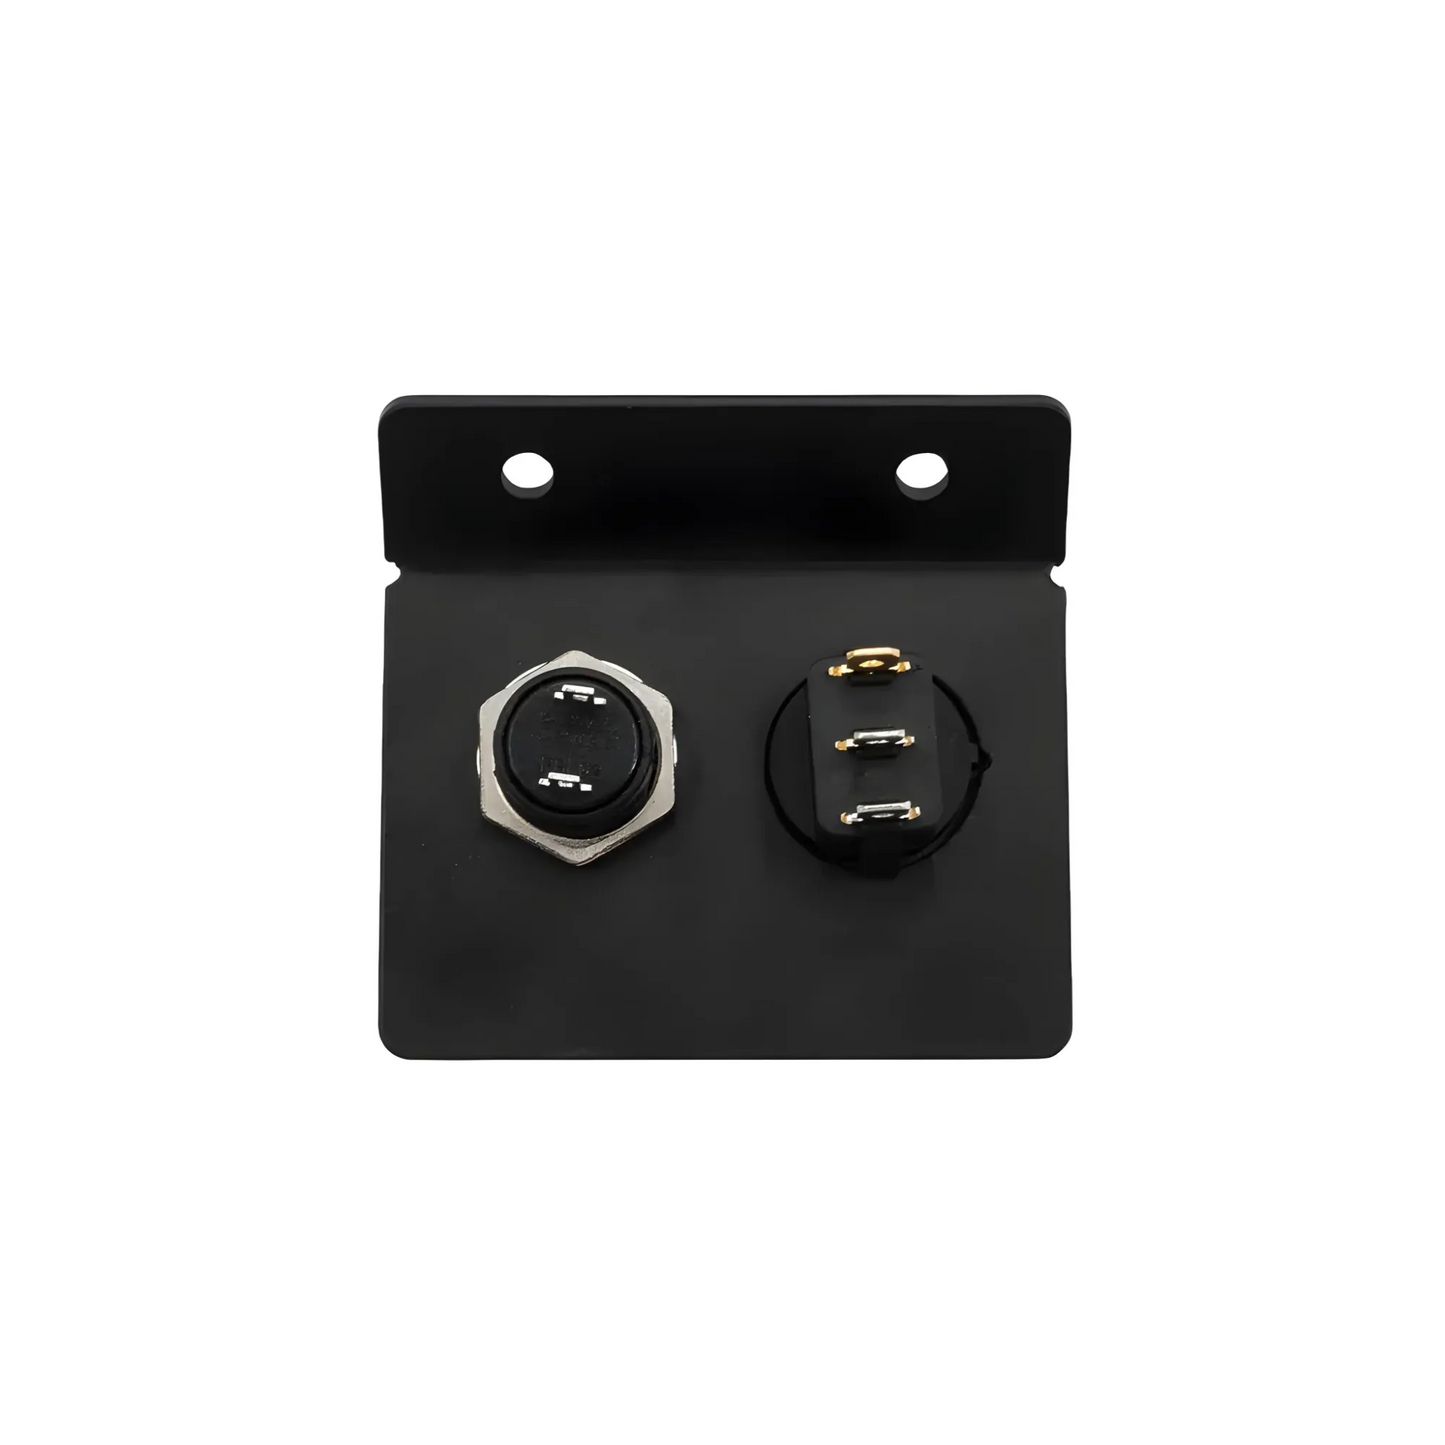 Nitrous Outlet Universal 2 Button Switch Panel - System Arm/Purge